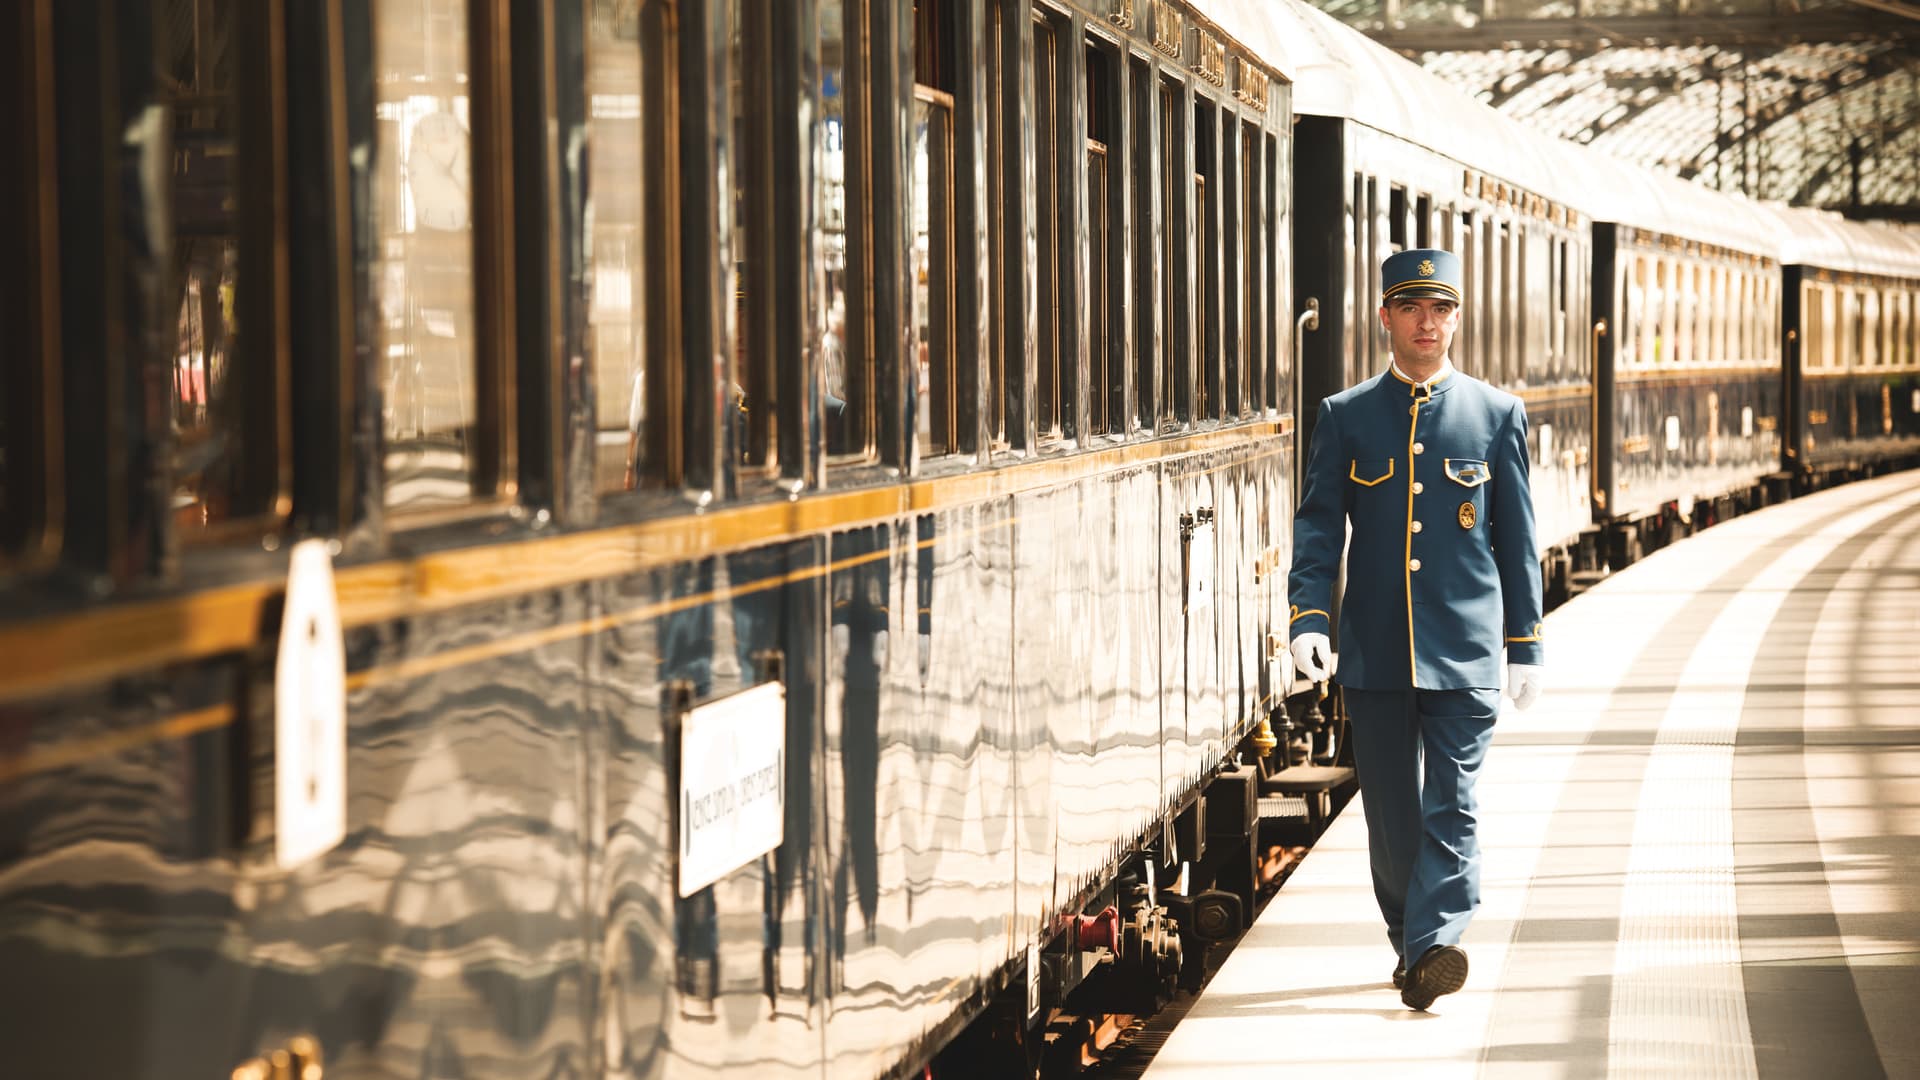 The oldest carriage on the Venice Simplon-Orient-Express dates to 1926.